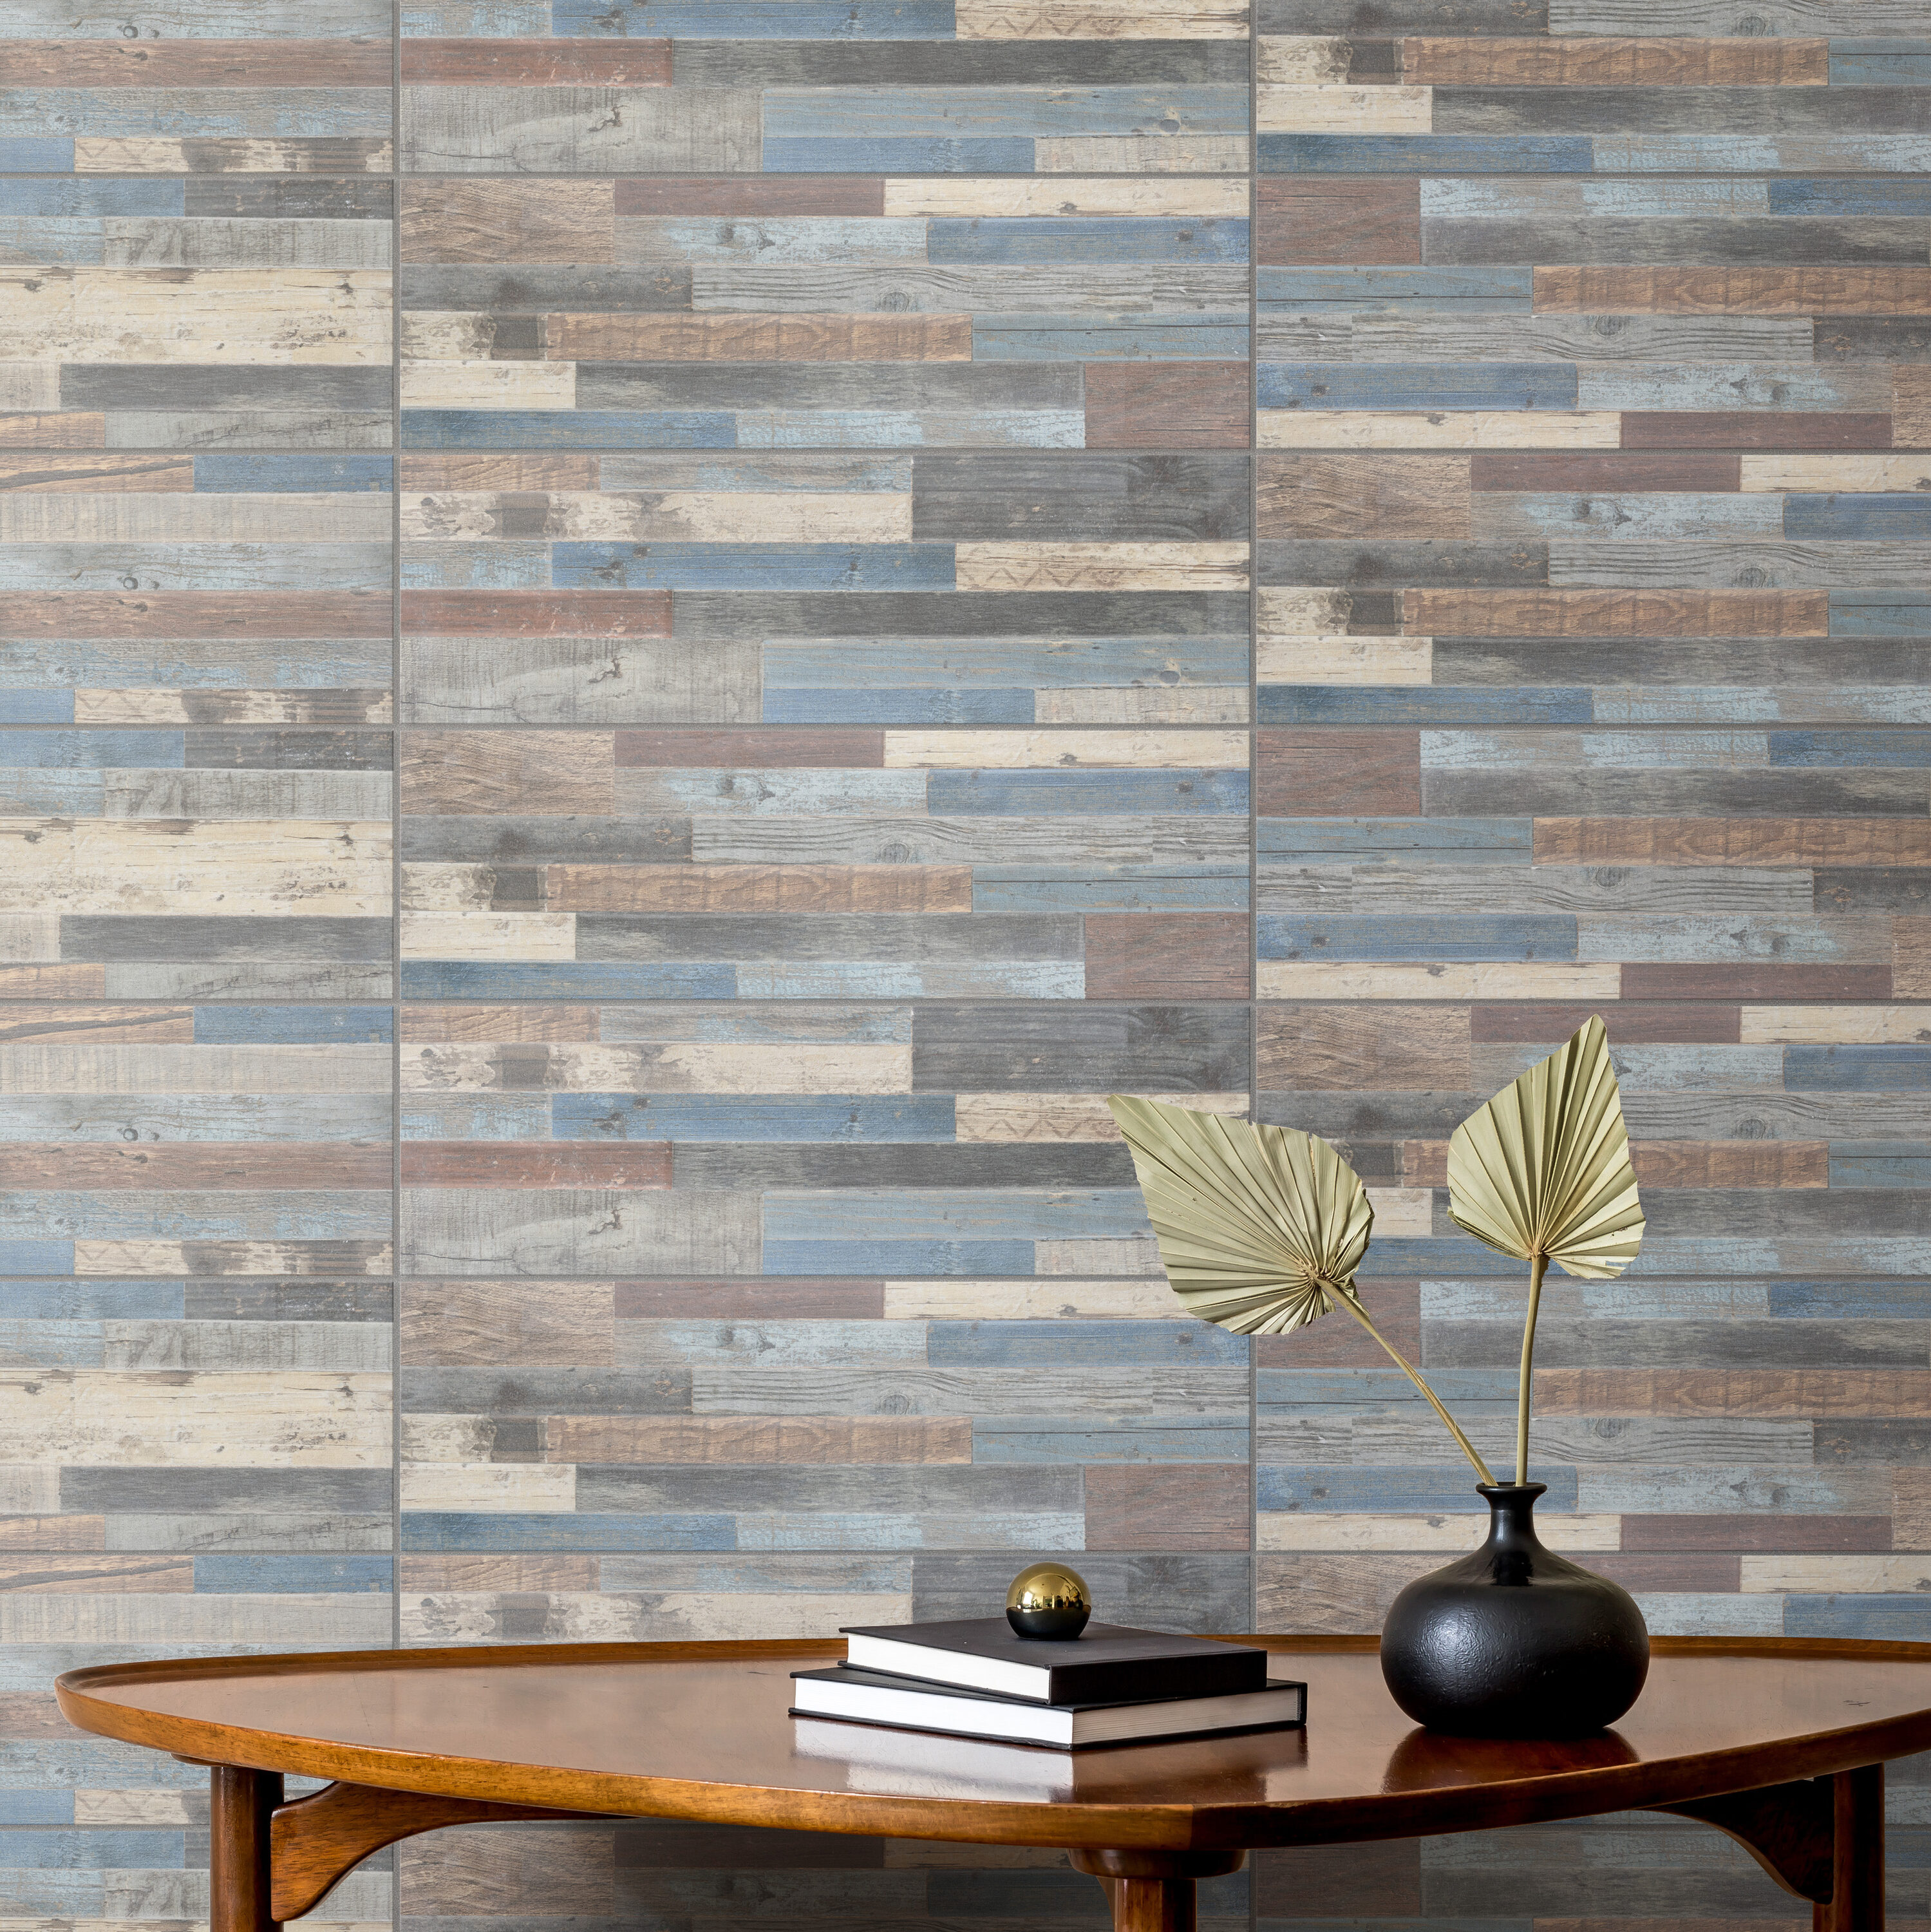 Affinity Tile Coleur Mix 7-in x 20-in Matte Ceramic Wood Look Wall Tile ...